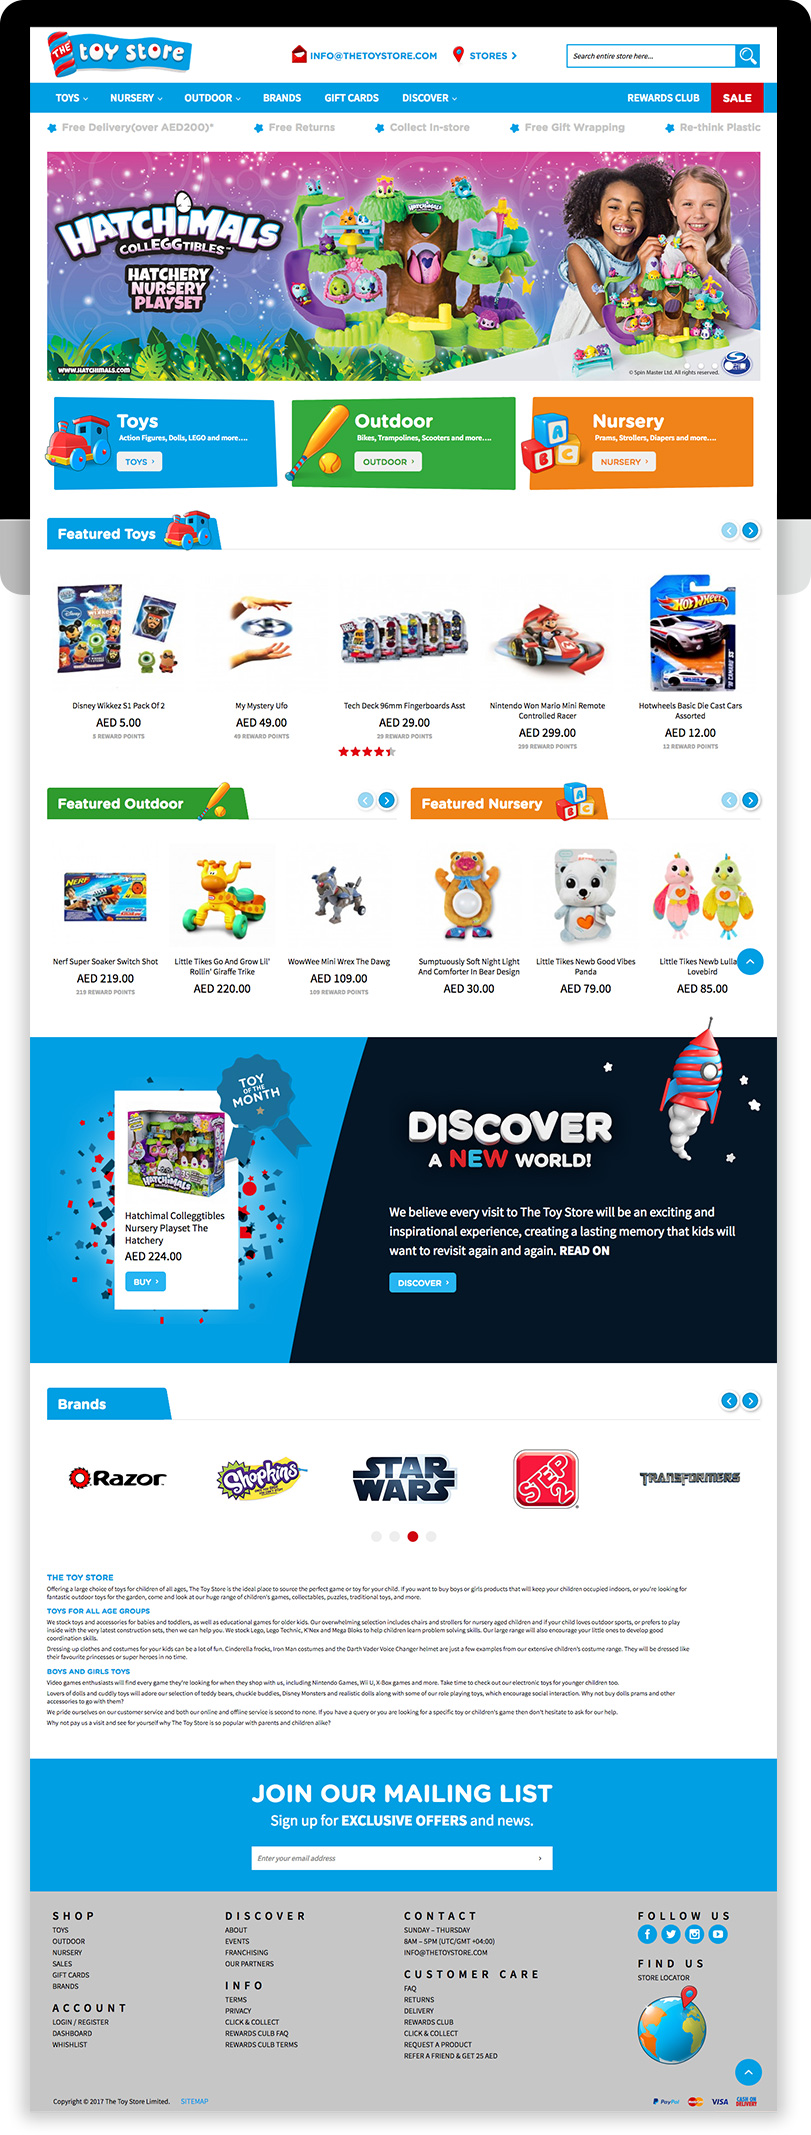 The Toy Store Magento Ecommerce Website on Desktop